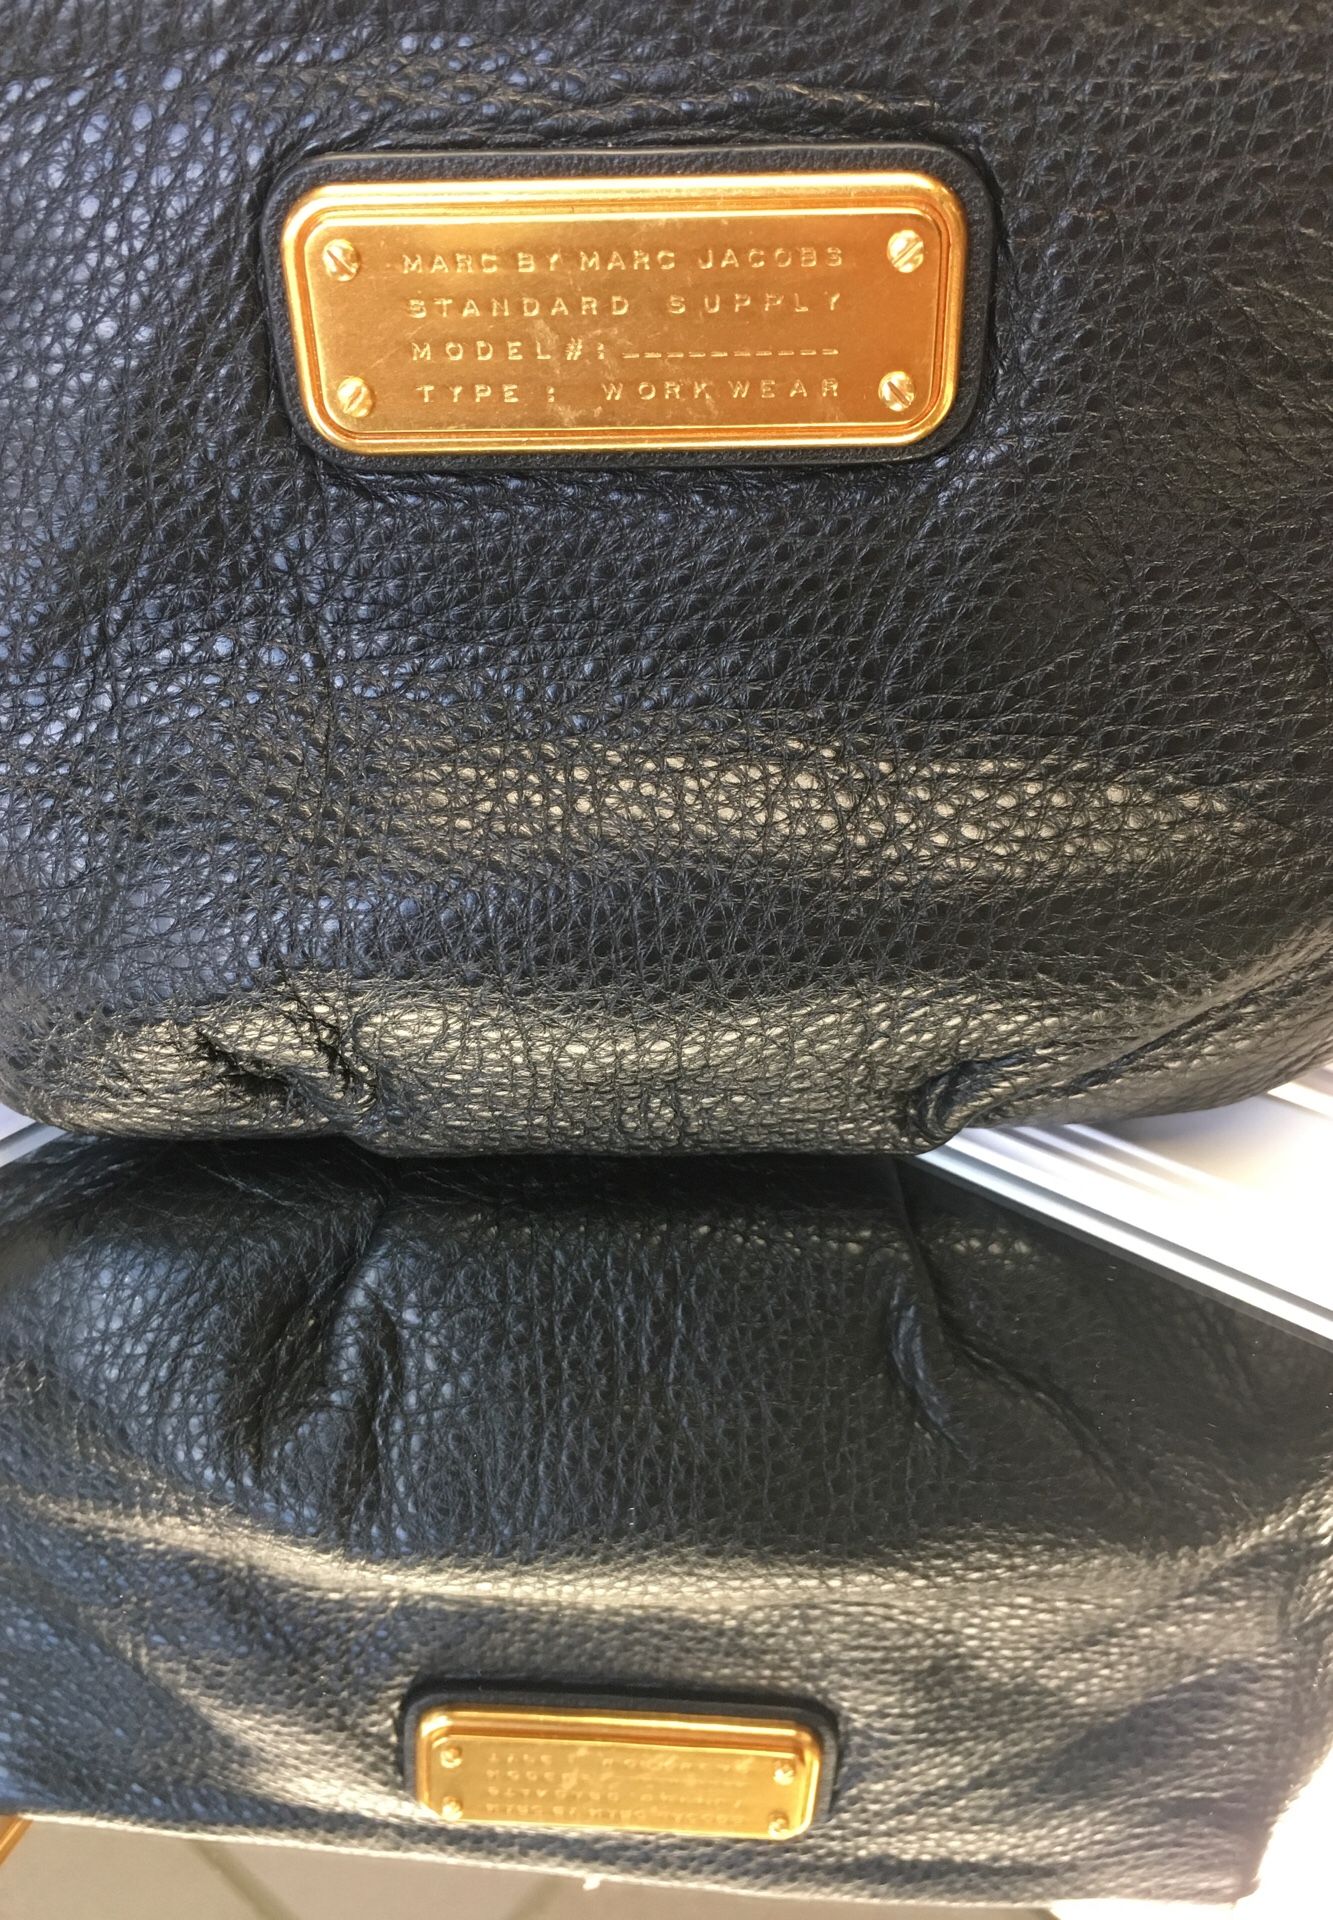 MARC BY MARC JACOBS CROSSBODY BAG BRAND NEW NEVER OPENED AND NEVER USED 100% AUTHENTIC PLEASE SEE MORE DETAILS BELOW VISIT MORE ON MY OFFER